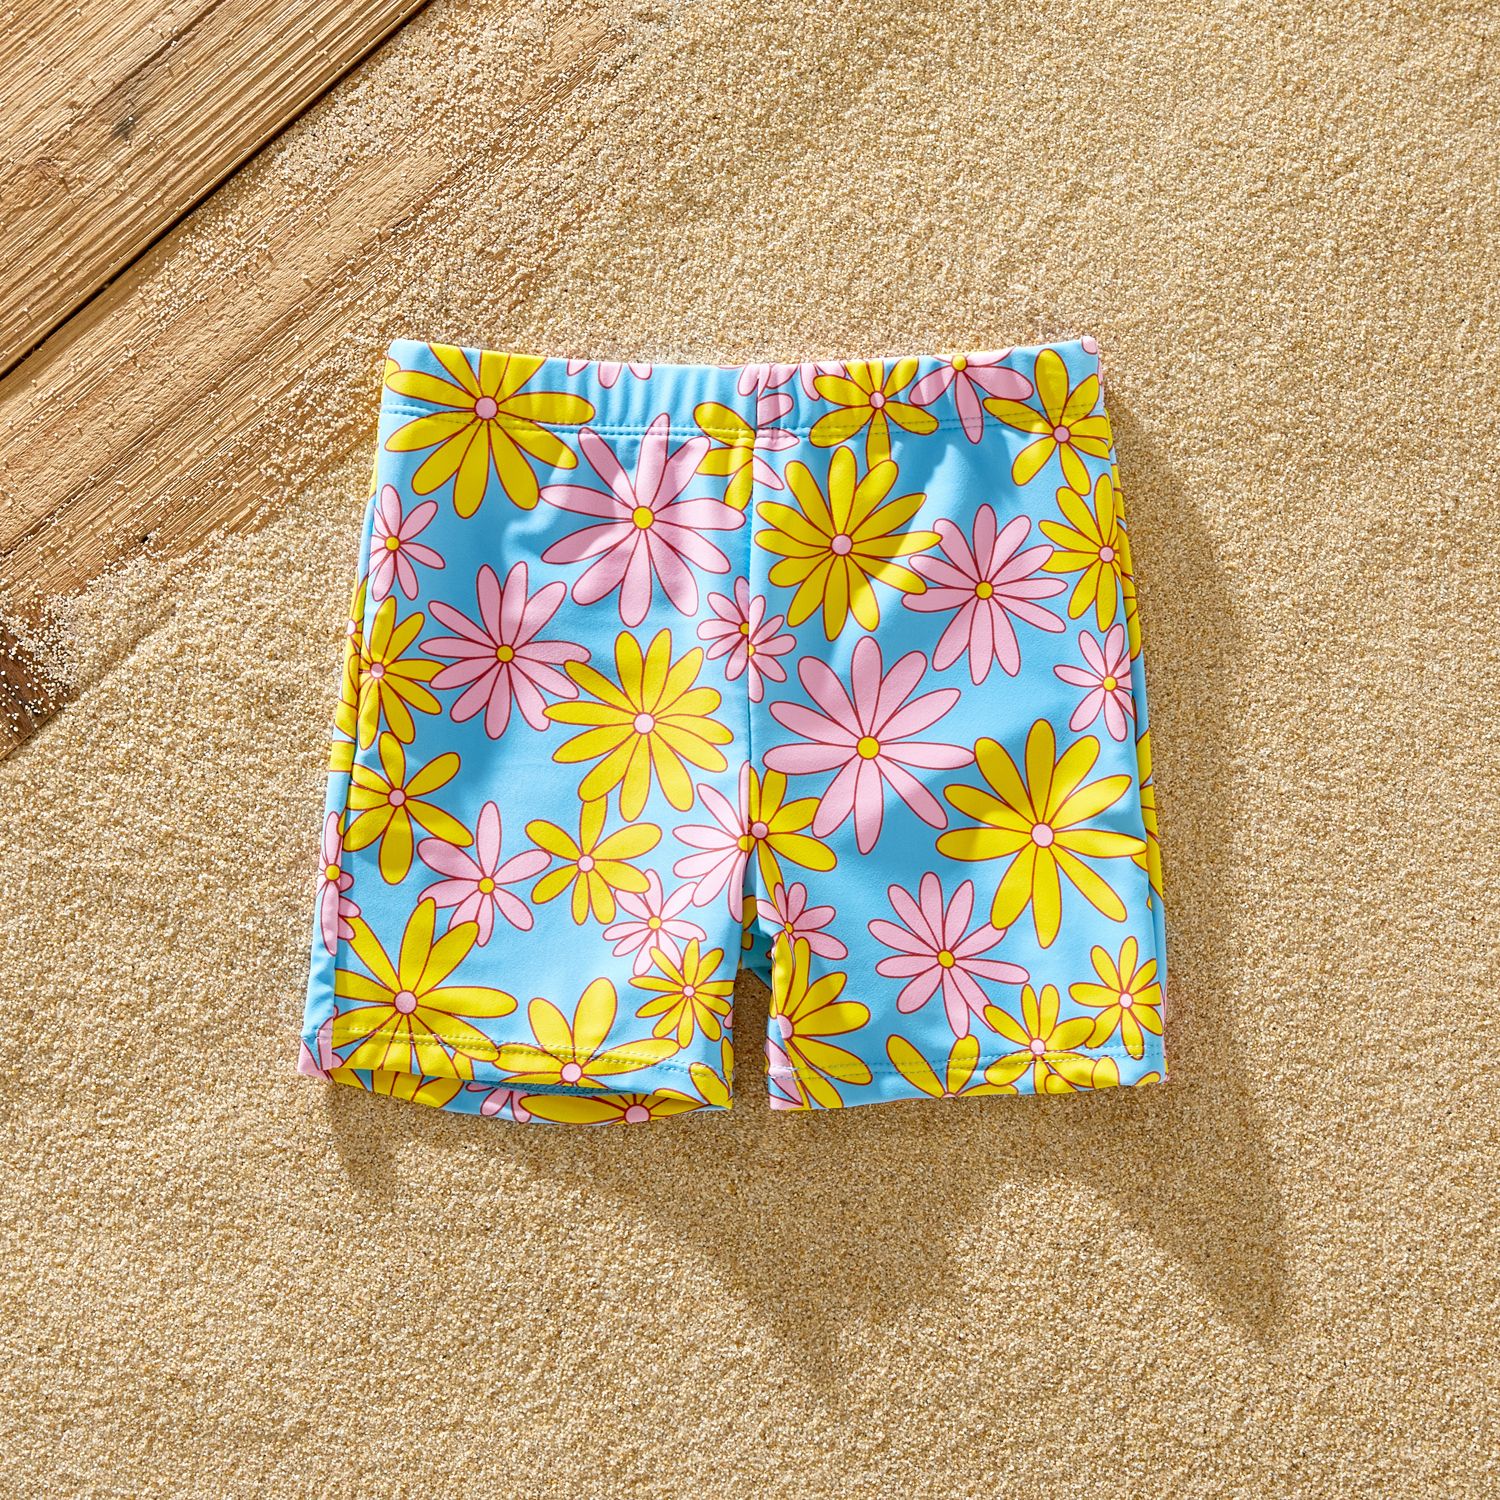 Family Matching Allover Daisy Floral Print One-piece Swimsuit Or Swim Trunks Shorts